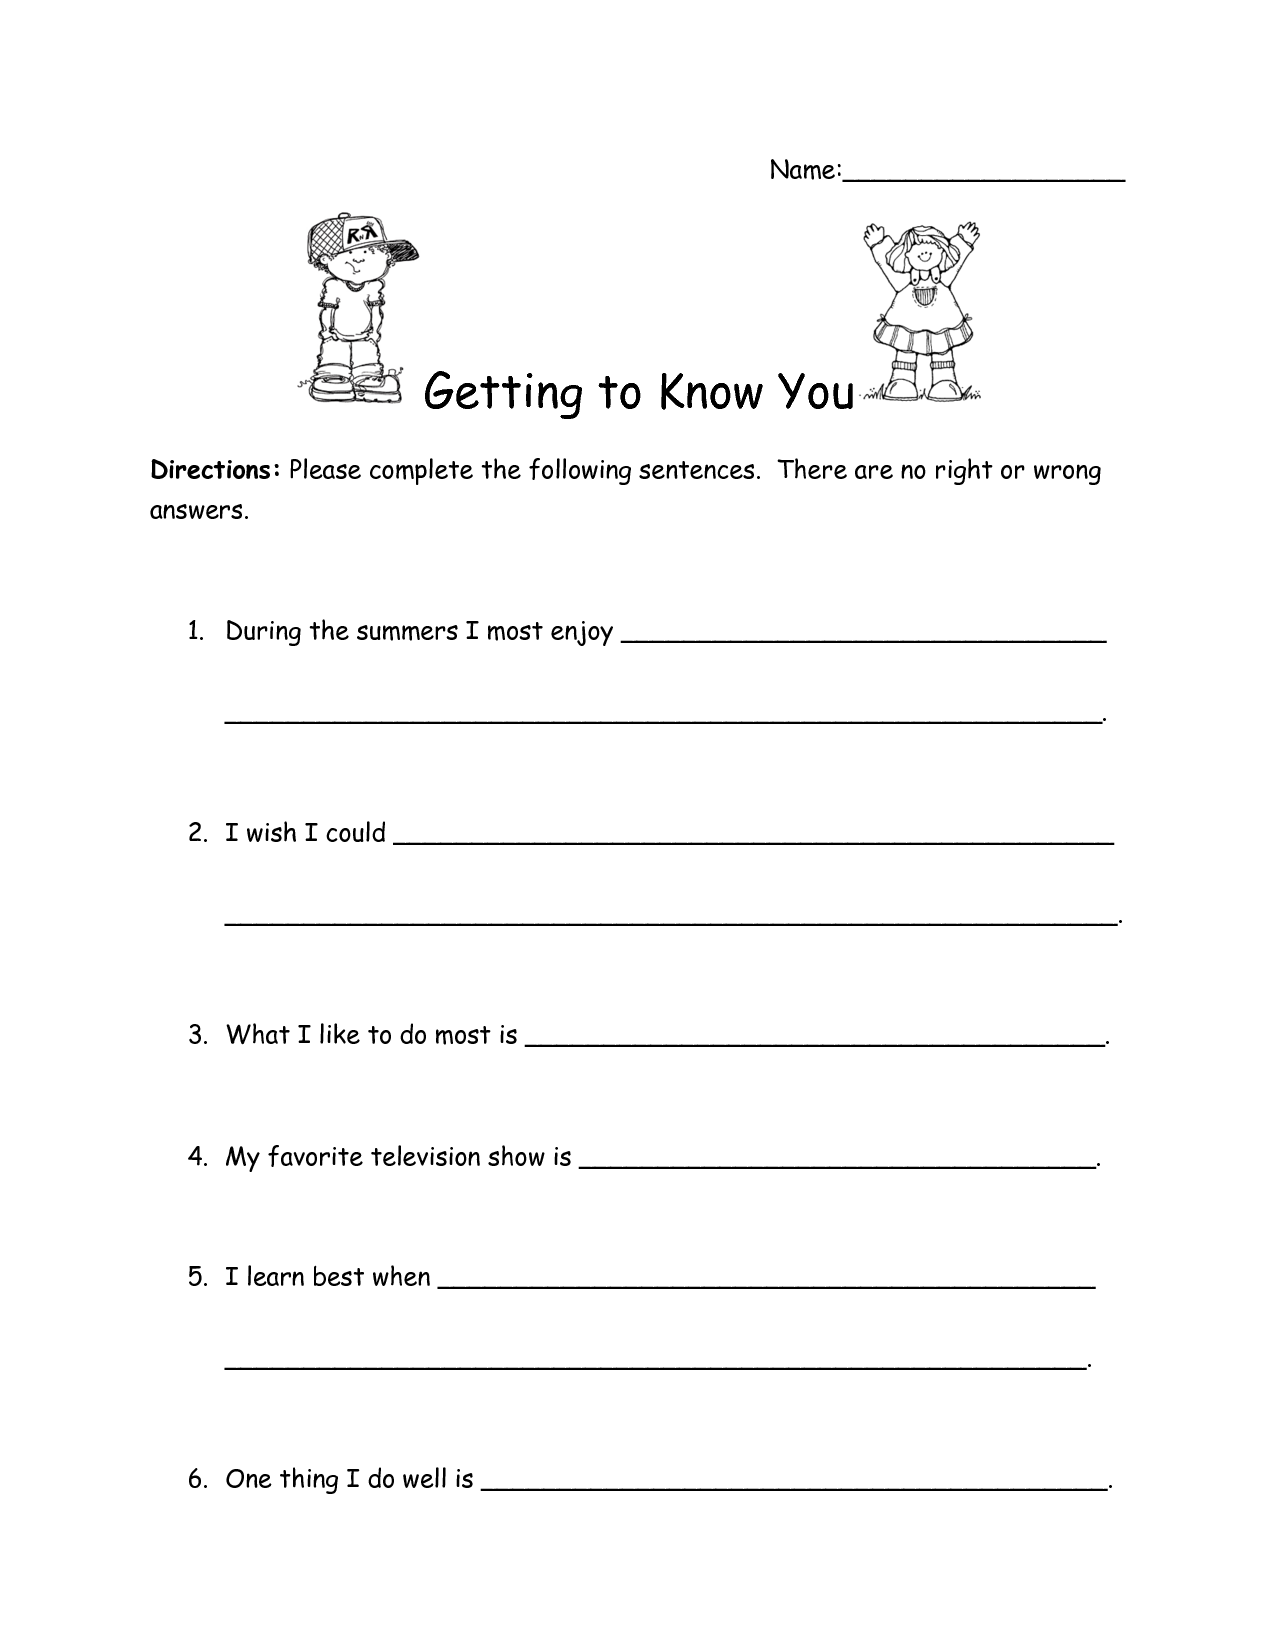 14 Best Images Of Worksheets About You English Language All About Me Activity Worksheets And